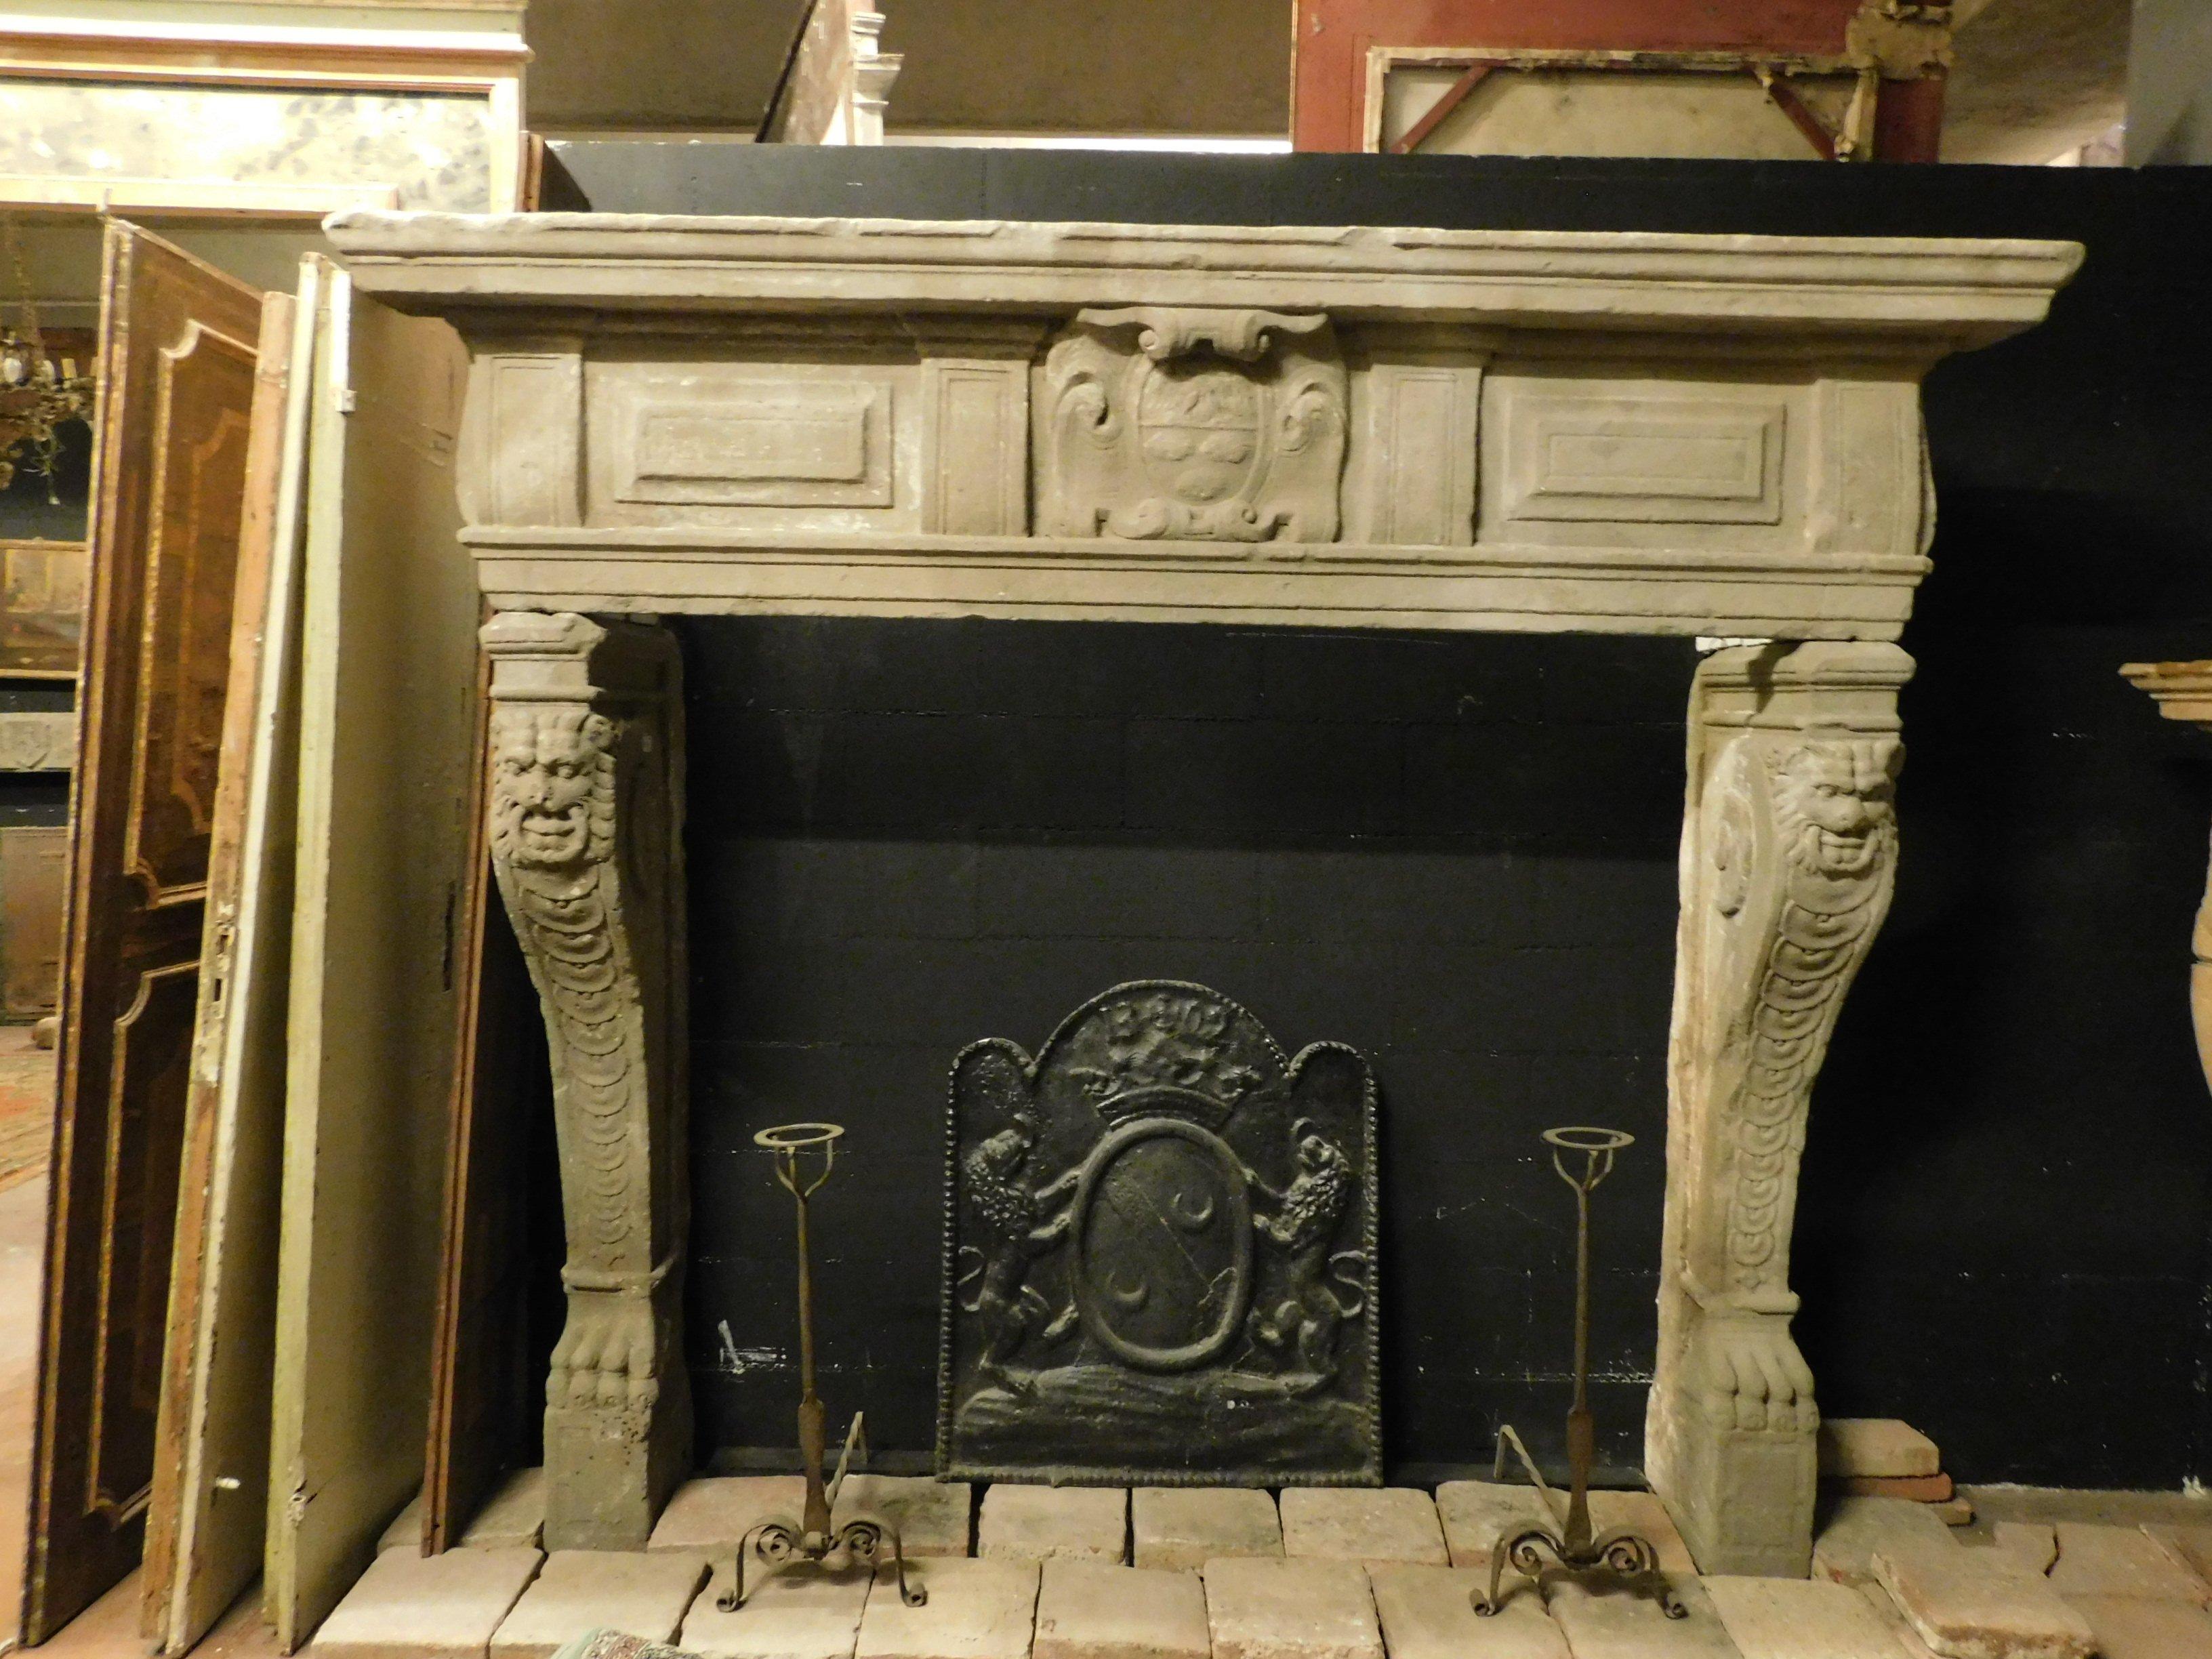 Ancient fireplace mantel in Serena stone, with lions' faces and hand carved legs, noble coat of arms in the center of the fireplace, from the high 16th century, from Central Italy, in a noble historic building.
A very important fireplace, both in